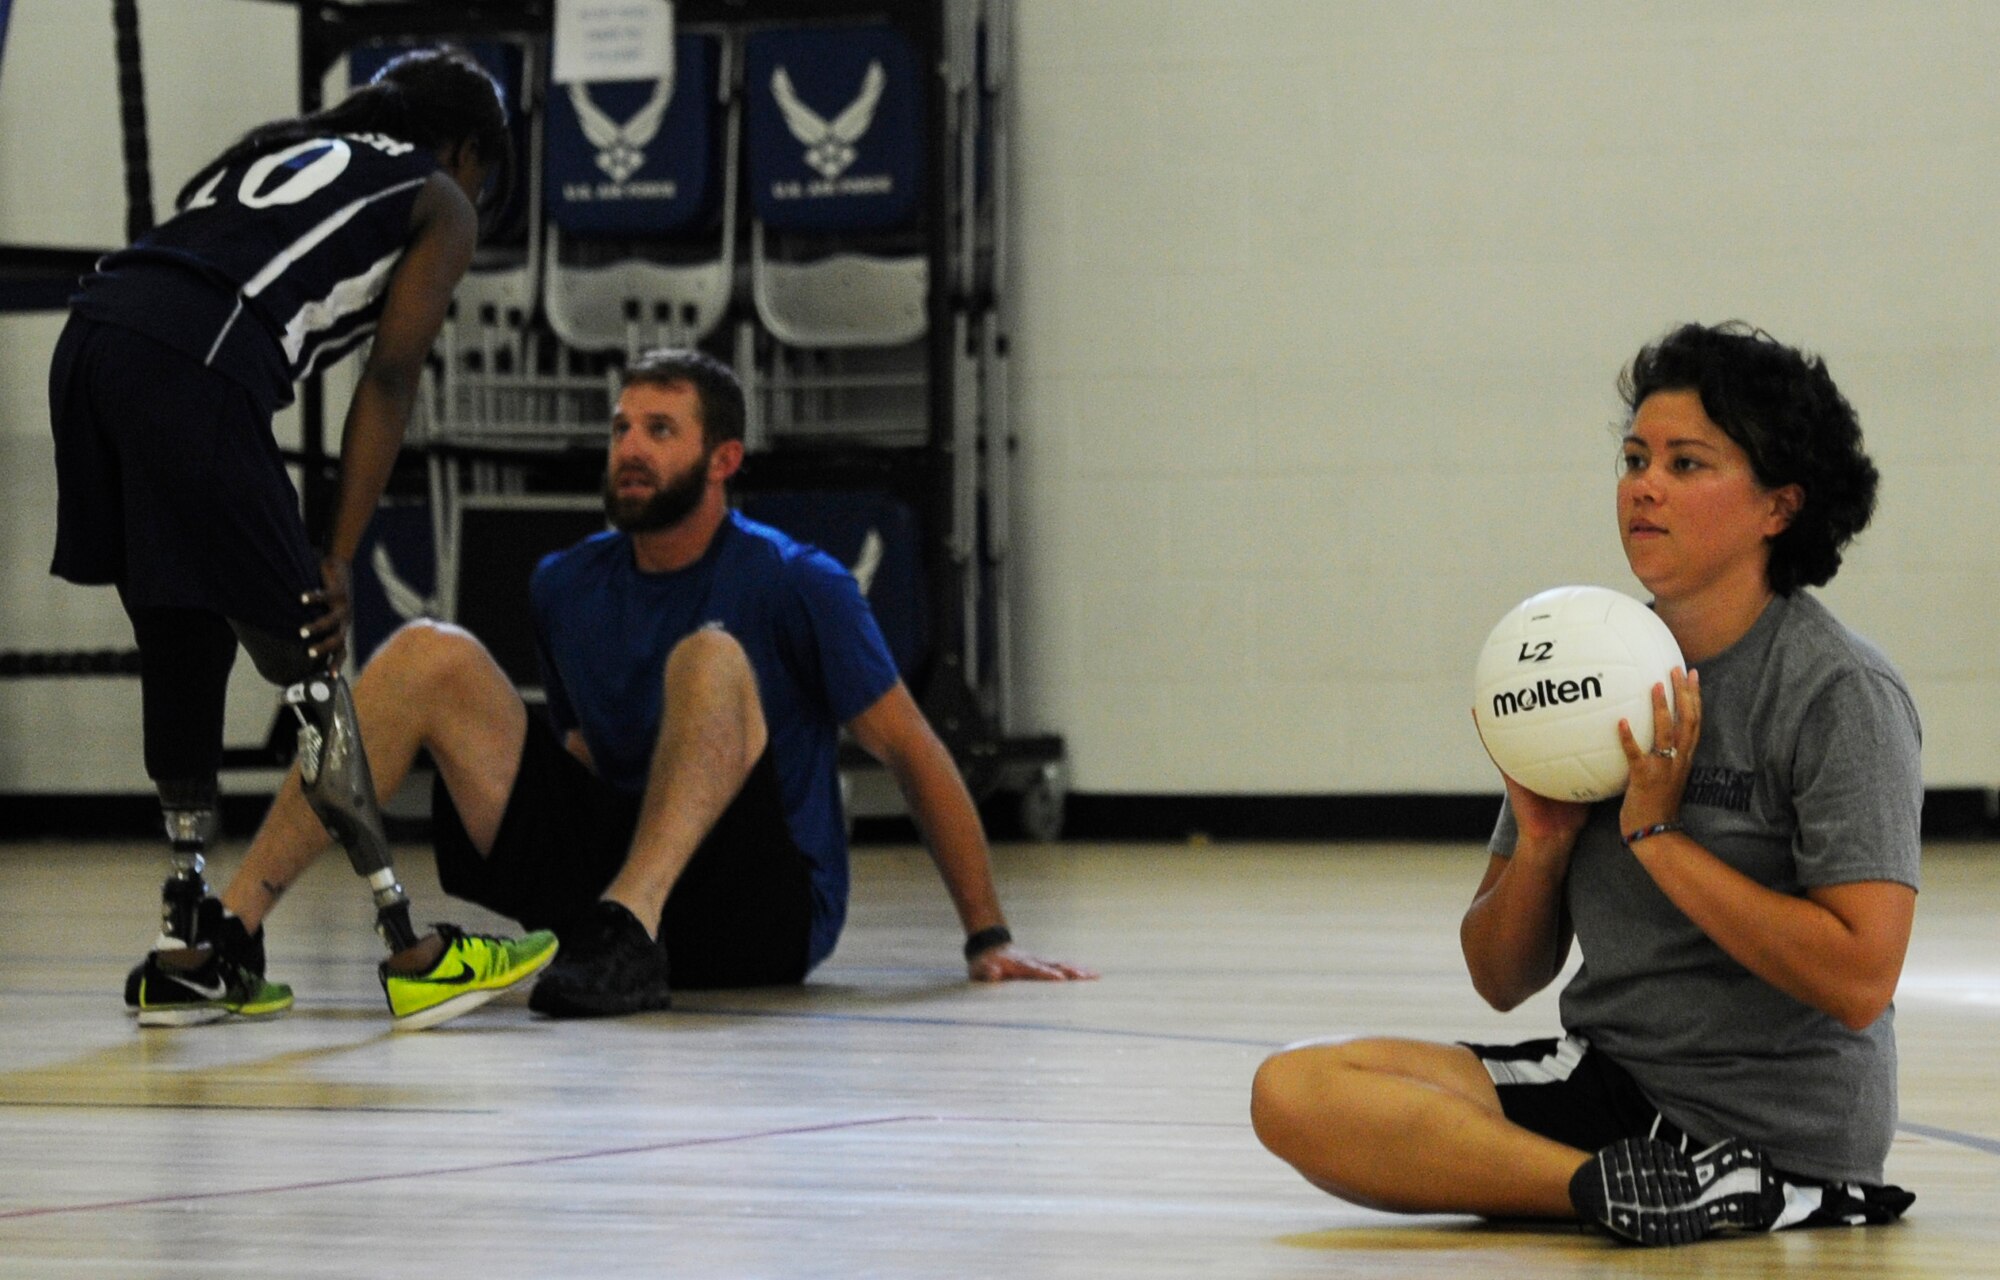 Capt. Sarah Evans, 59th Medical Wing patient learns the fundamentals of sitting volleyball at an Air Force Wounded Warrior Sports Camp Clinic at the Joint Base Andrews West Fitness Center, Md., June 27, 2013.  More than 30 Air Force Wounded Warriors attended the two-day adaptive sports camp of wheelchair basketball, sitting volleyball, archery, swimming, air rifle/pistol shooting and track and field, designed to help them overcome their challenges and enjoy a physically active lifestyle. (U.S. Air Force photo/Airman 1st Class Nesha Humes)